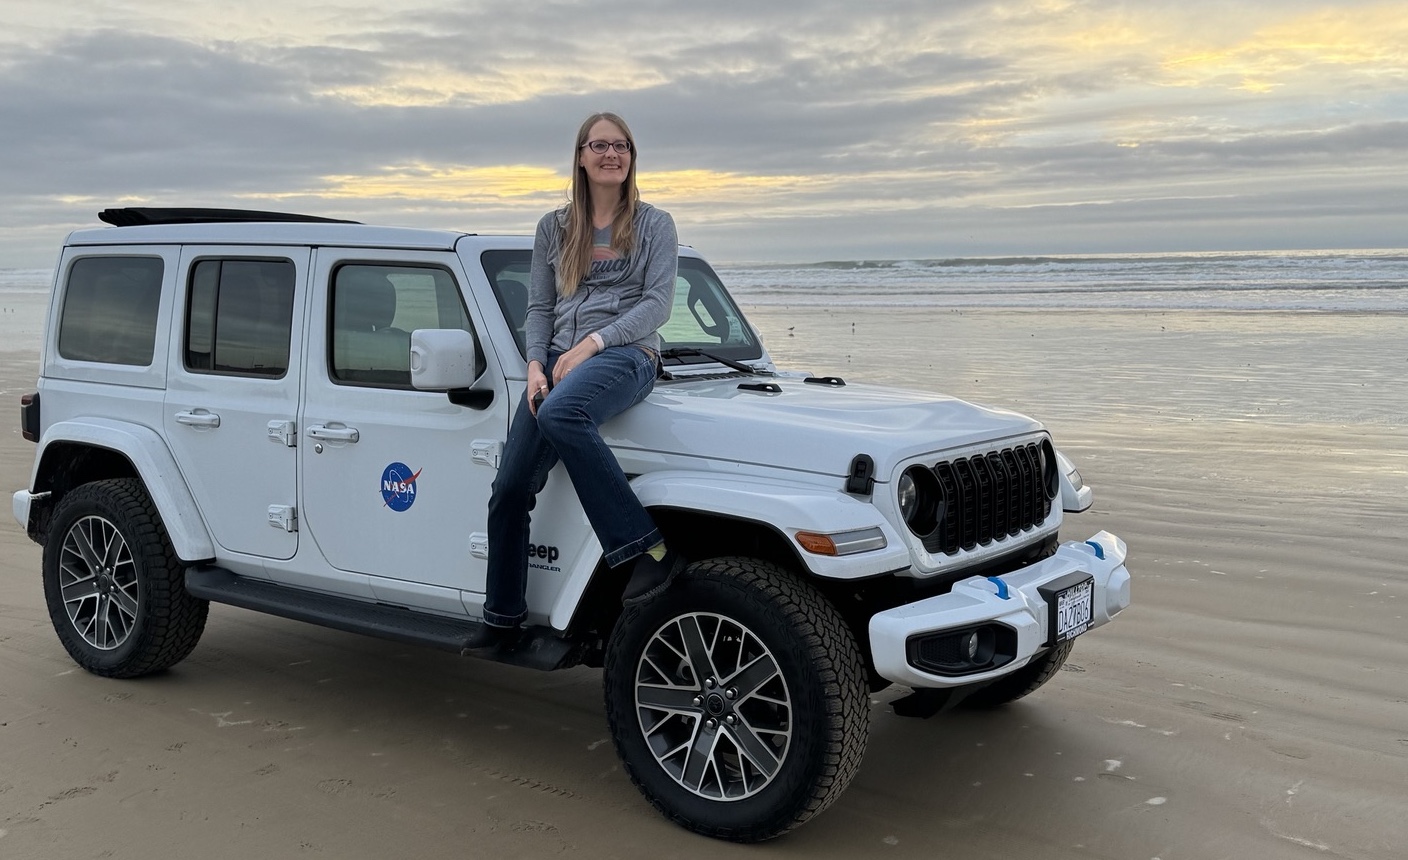 tracey sitting on new jeep at the beach